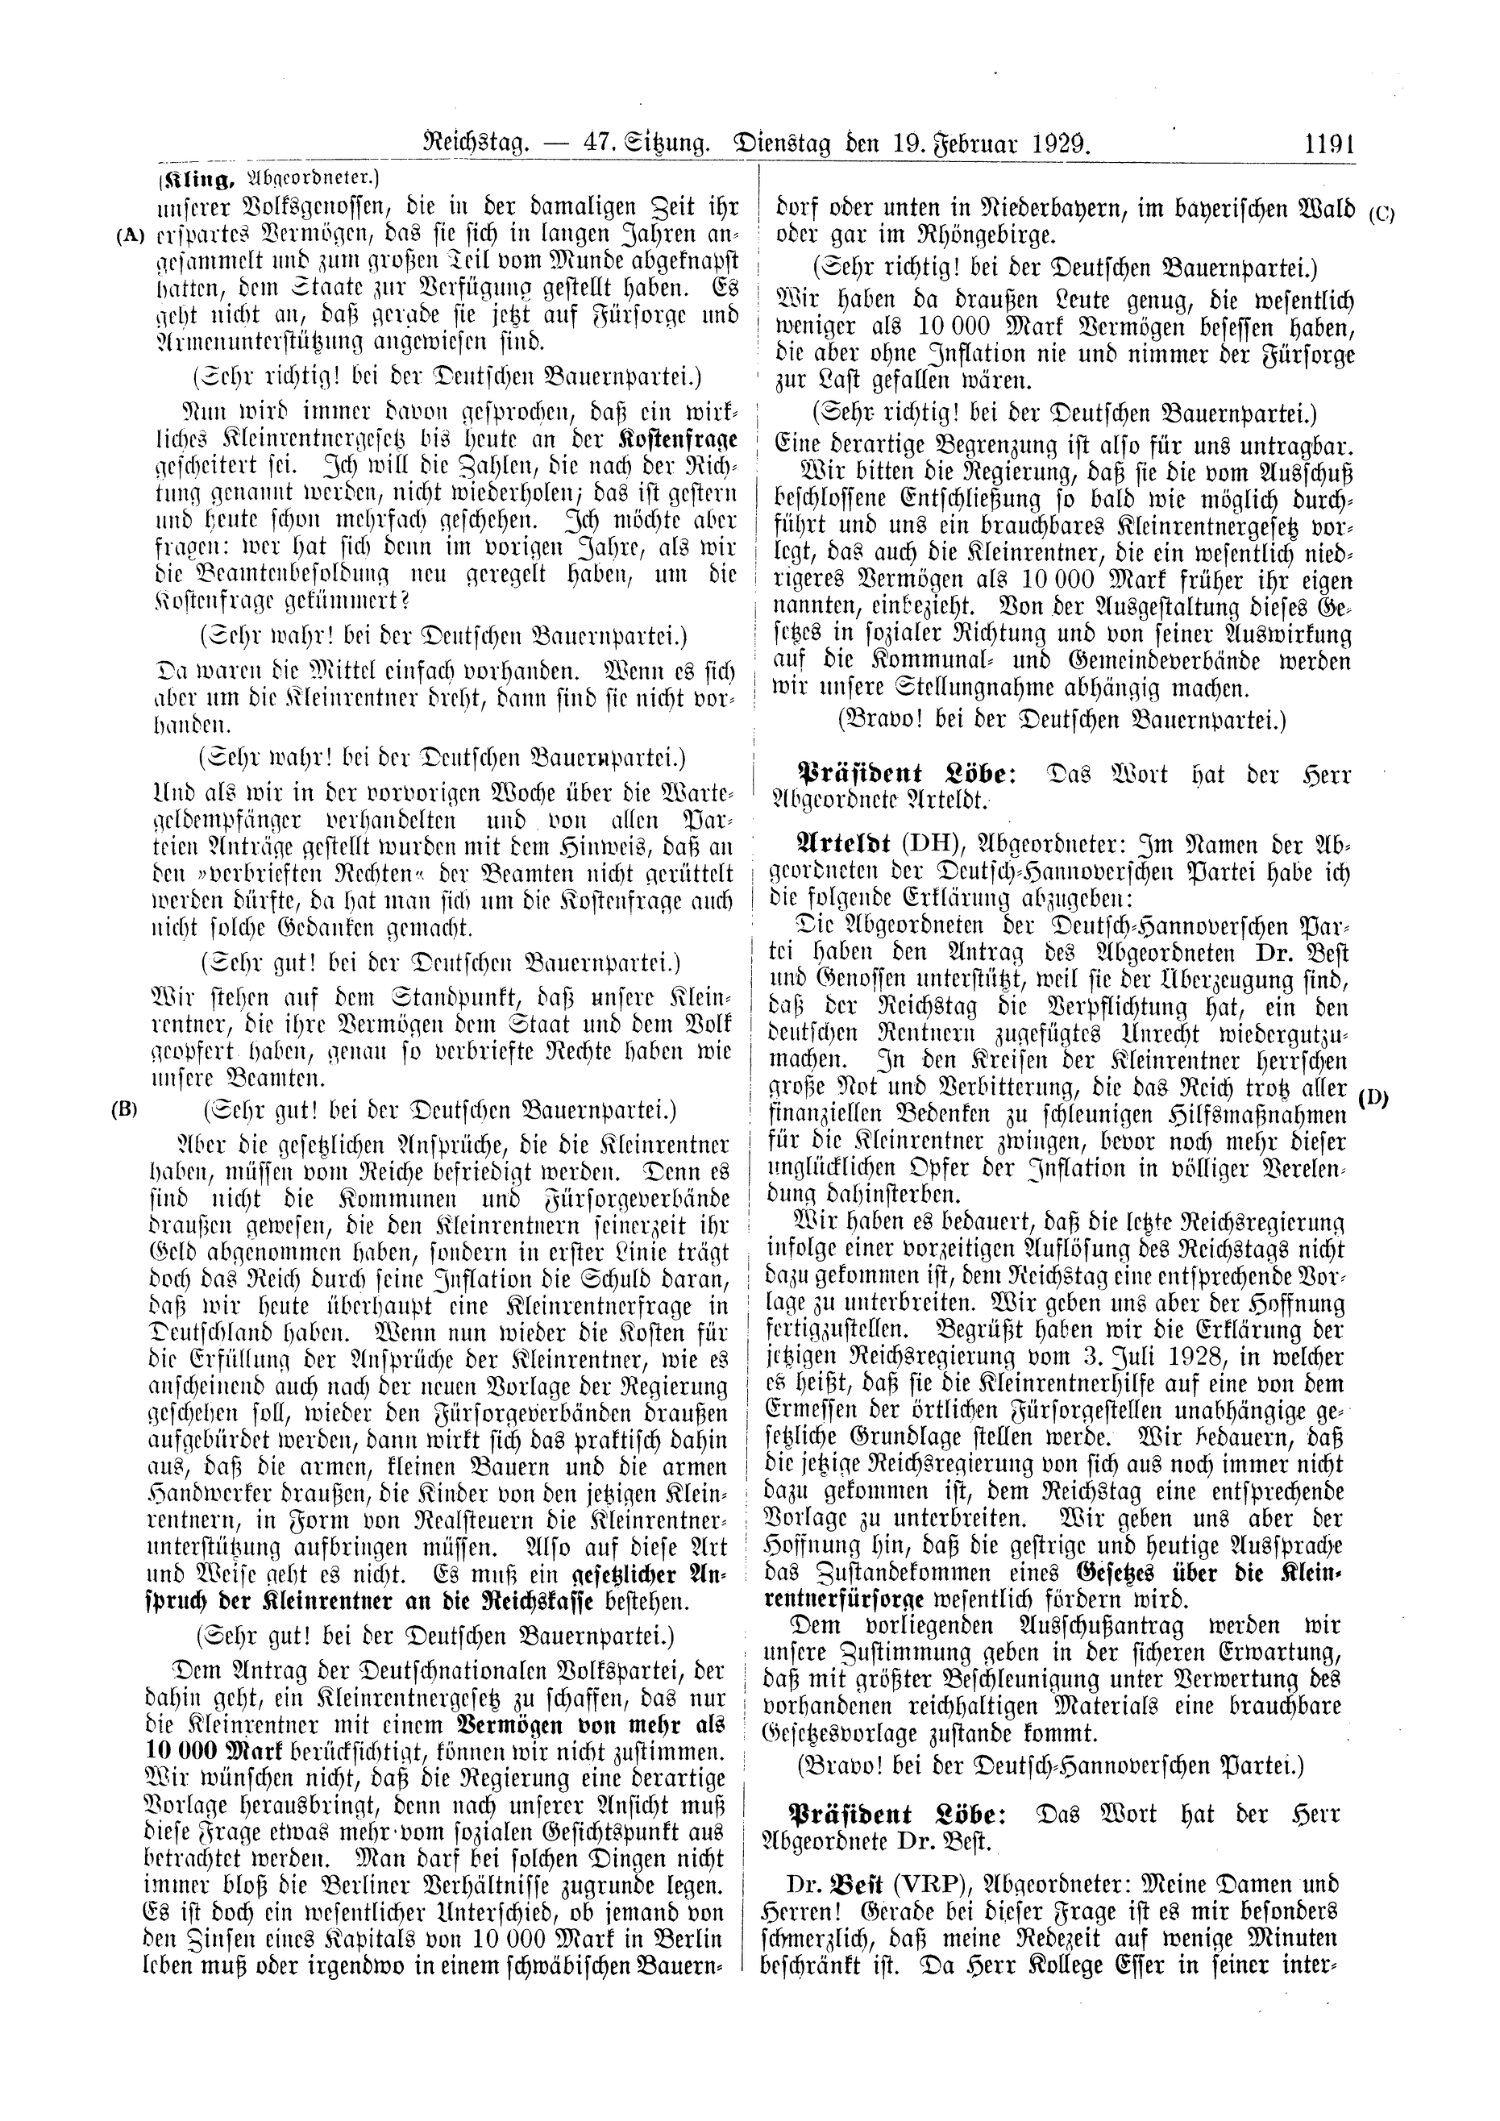 Scan of page 1191